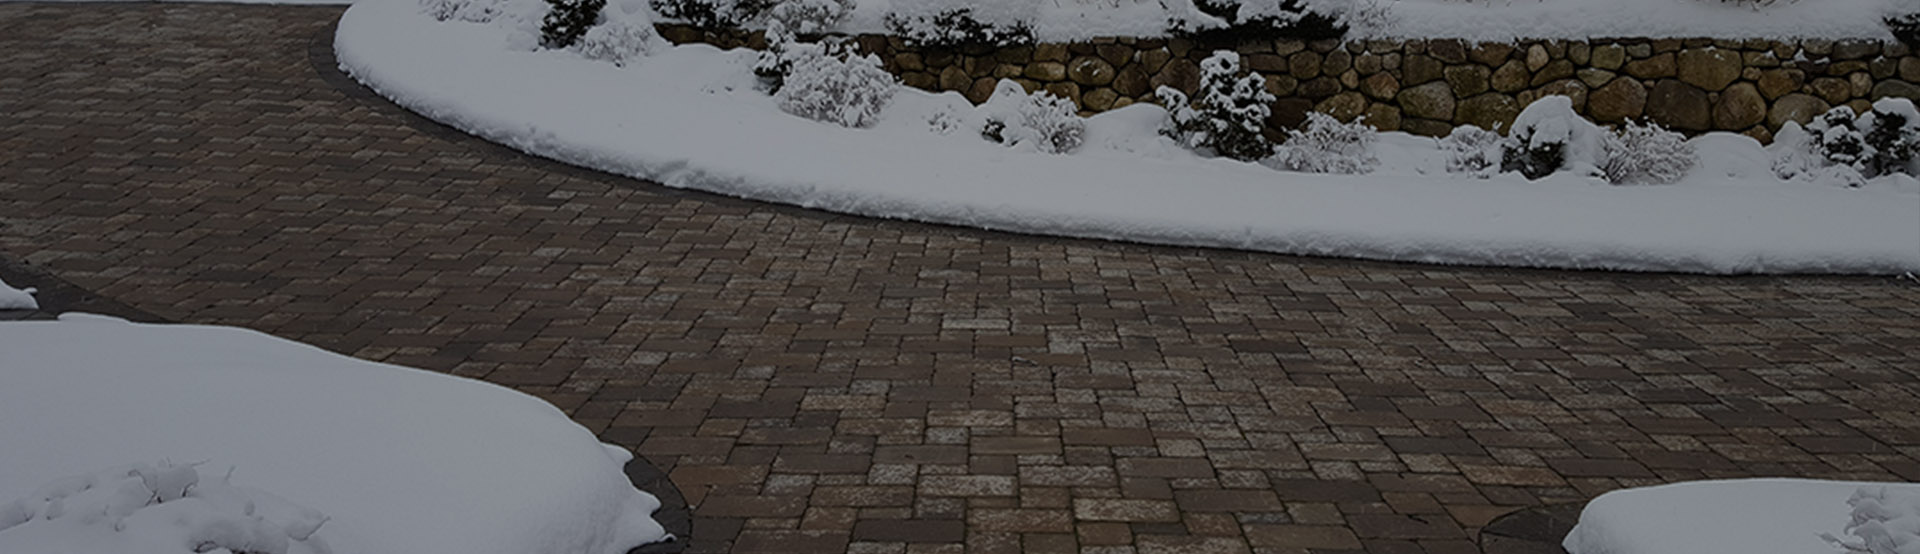 Automated heated driveway with controls banner